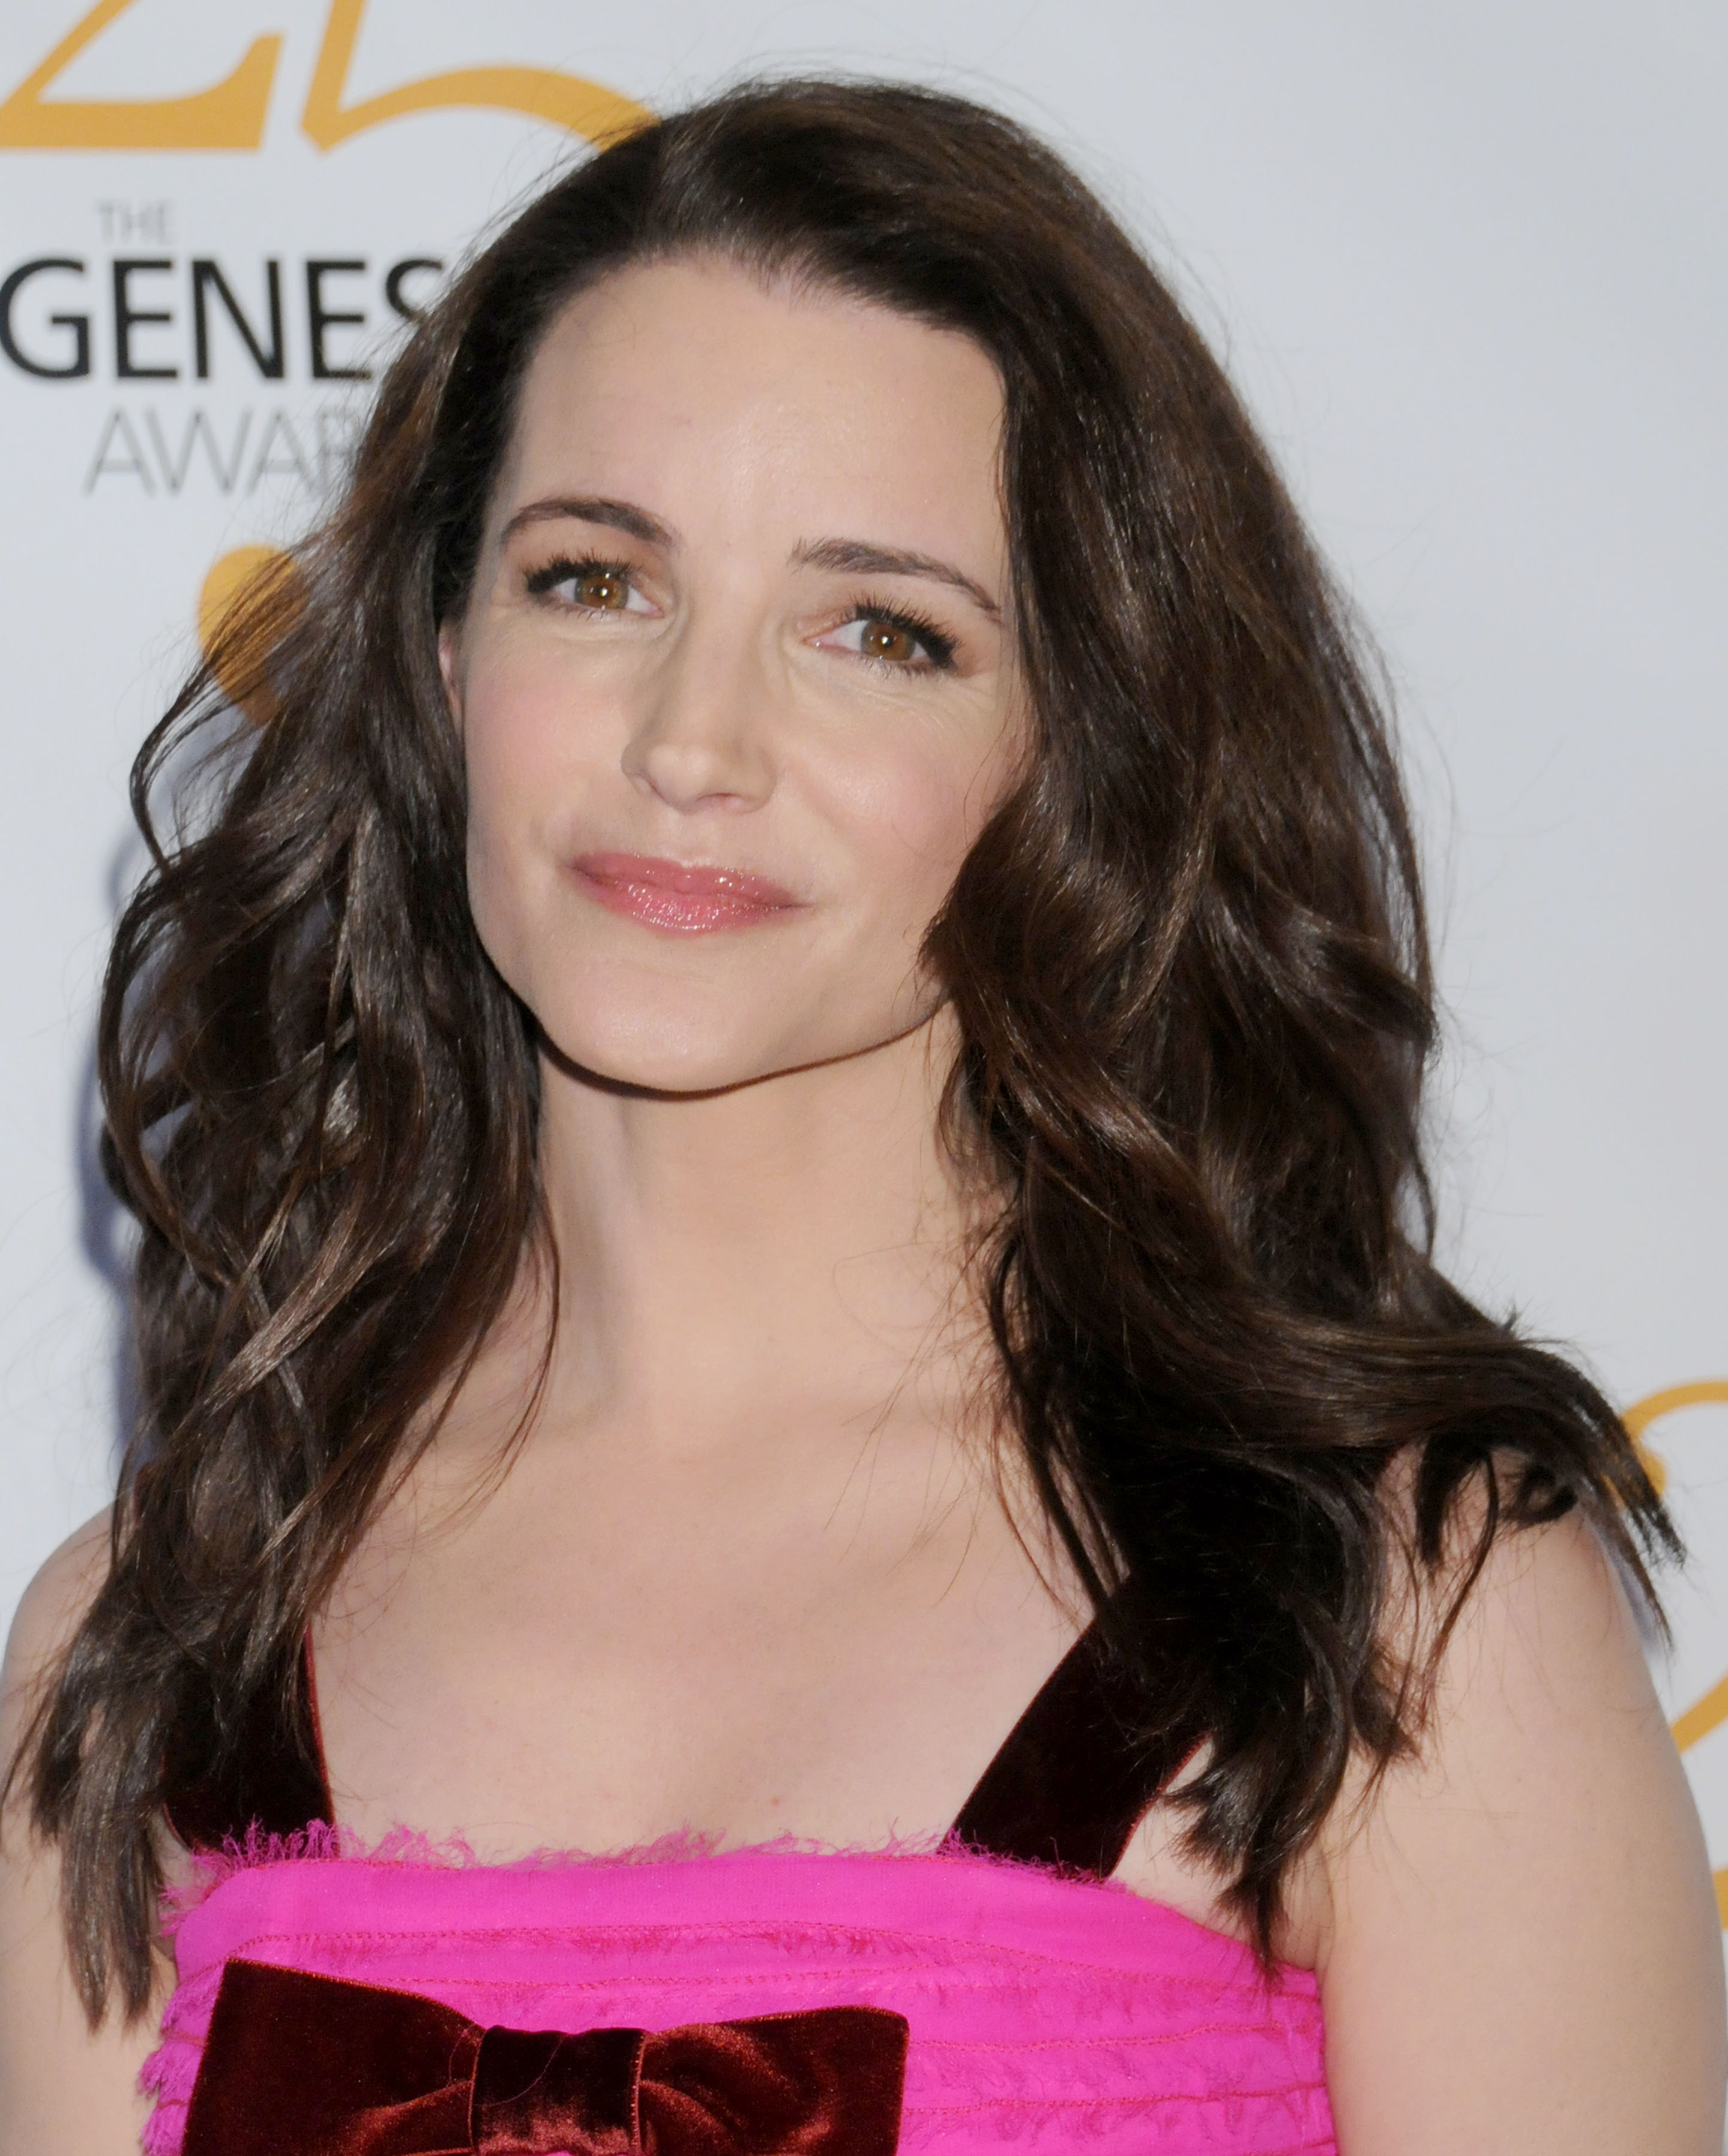 Kristin Davis arrives at the 25th Anniversary Genesis Awards at the Hyatt Regency Century Plaza Hotel on March 19, 2011 in Century City, California. | Source: Getty Images